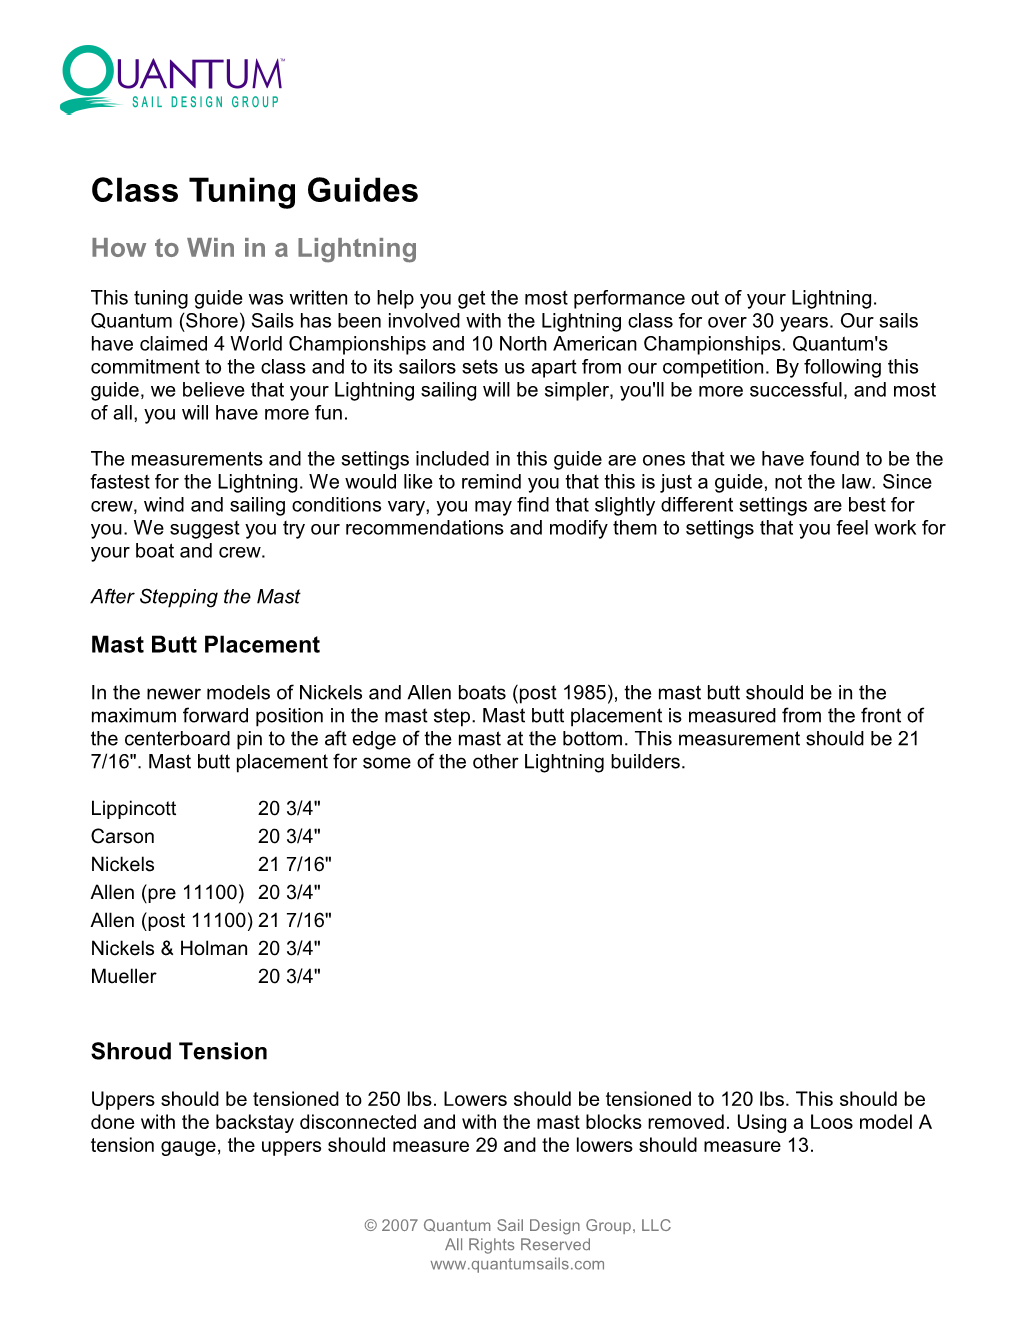 Lightning Class Tuning Guides